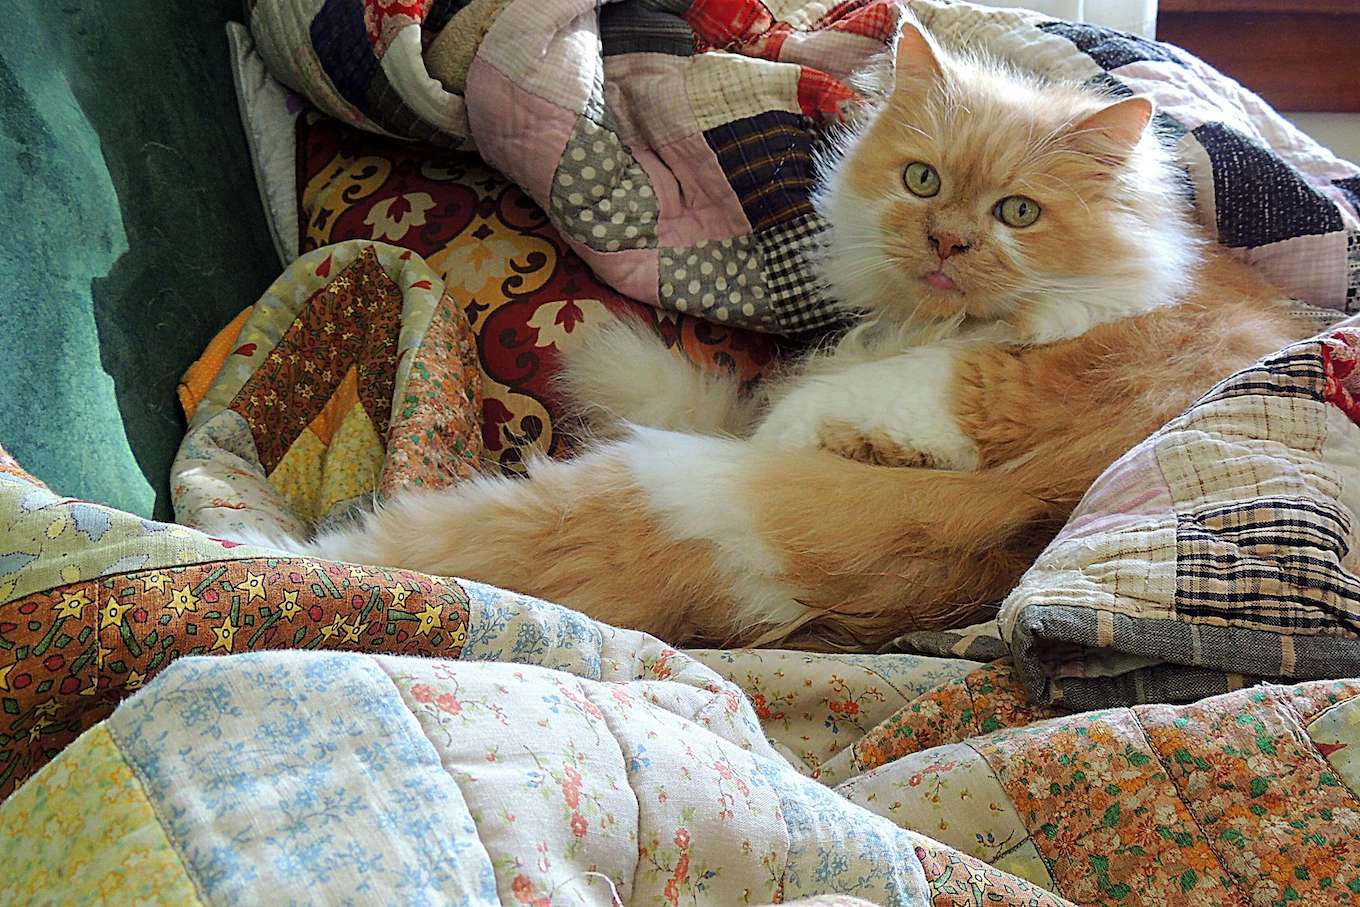 A pet photo of an orange and white cat lying on a pile of colorful quilts.